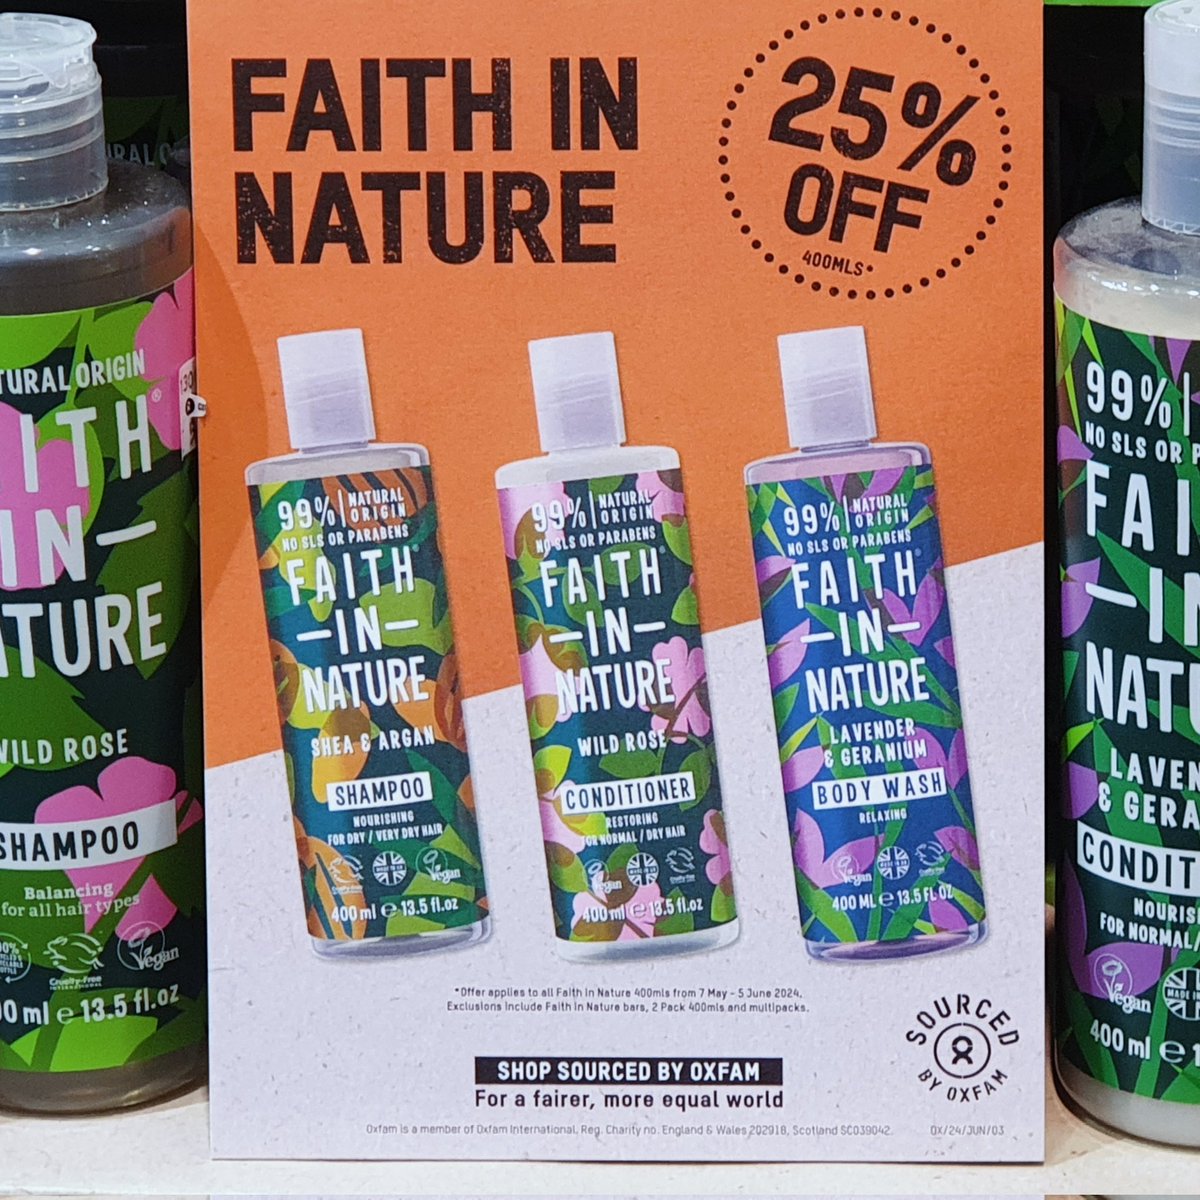 At #Oxfam #Harpenden we've taken 25% off selected @FaithInNature products until 5th June! Come down to 3, Harding Parade & choose your favourite shampoo, conditioner & body wash from our fabulous range! (Offer applies to individual 400ml bottles). Open 10am to 5pm Mon to Sat.